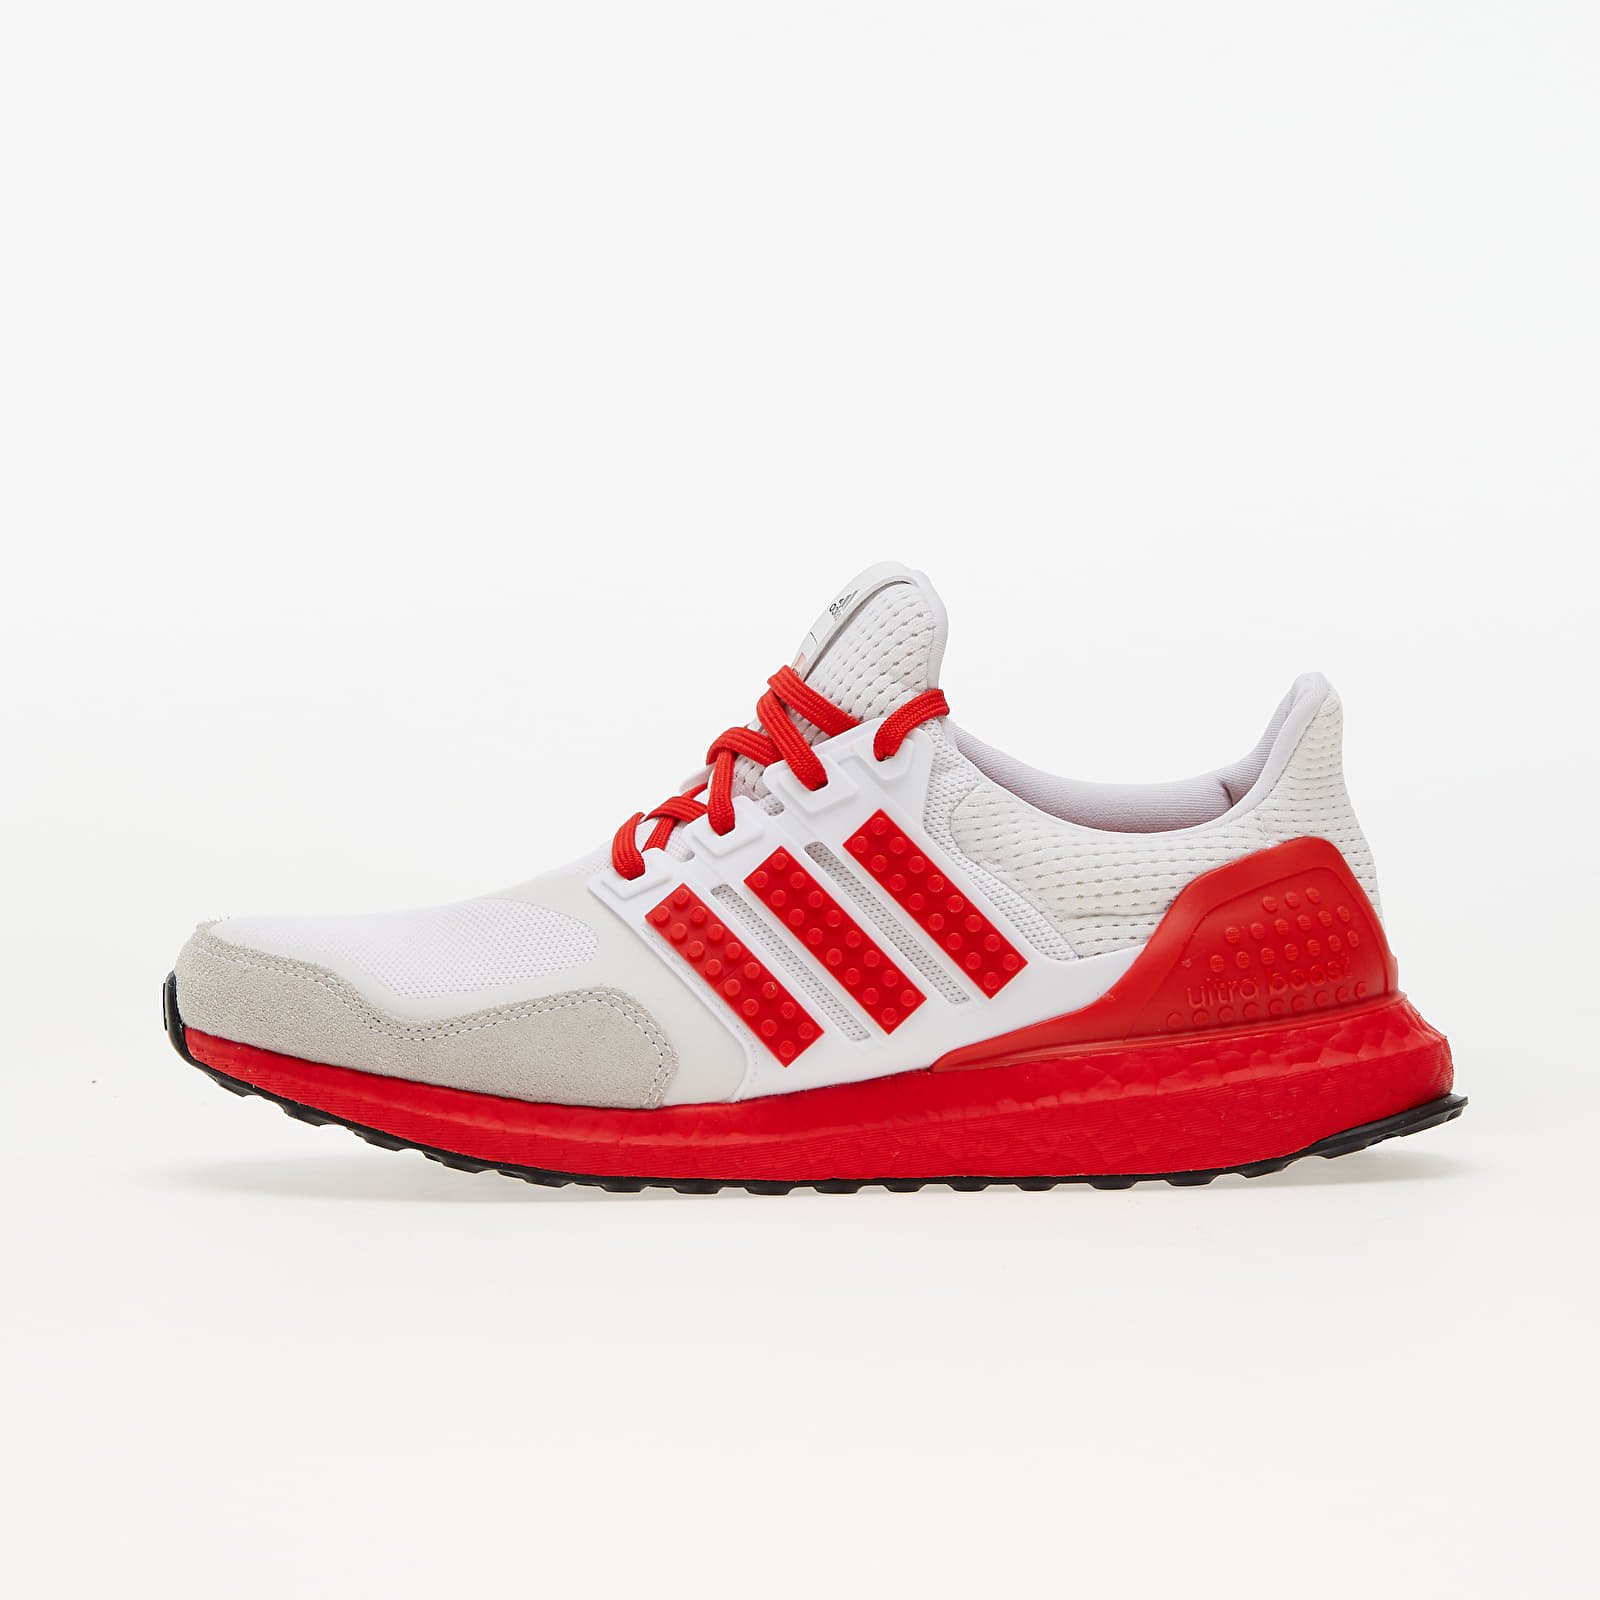 Men's shoes adidas UltraBOOST DNA x LEGO® Ftw White/ Red/ Shock Blue